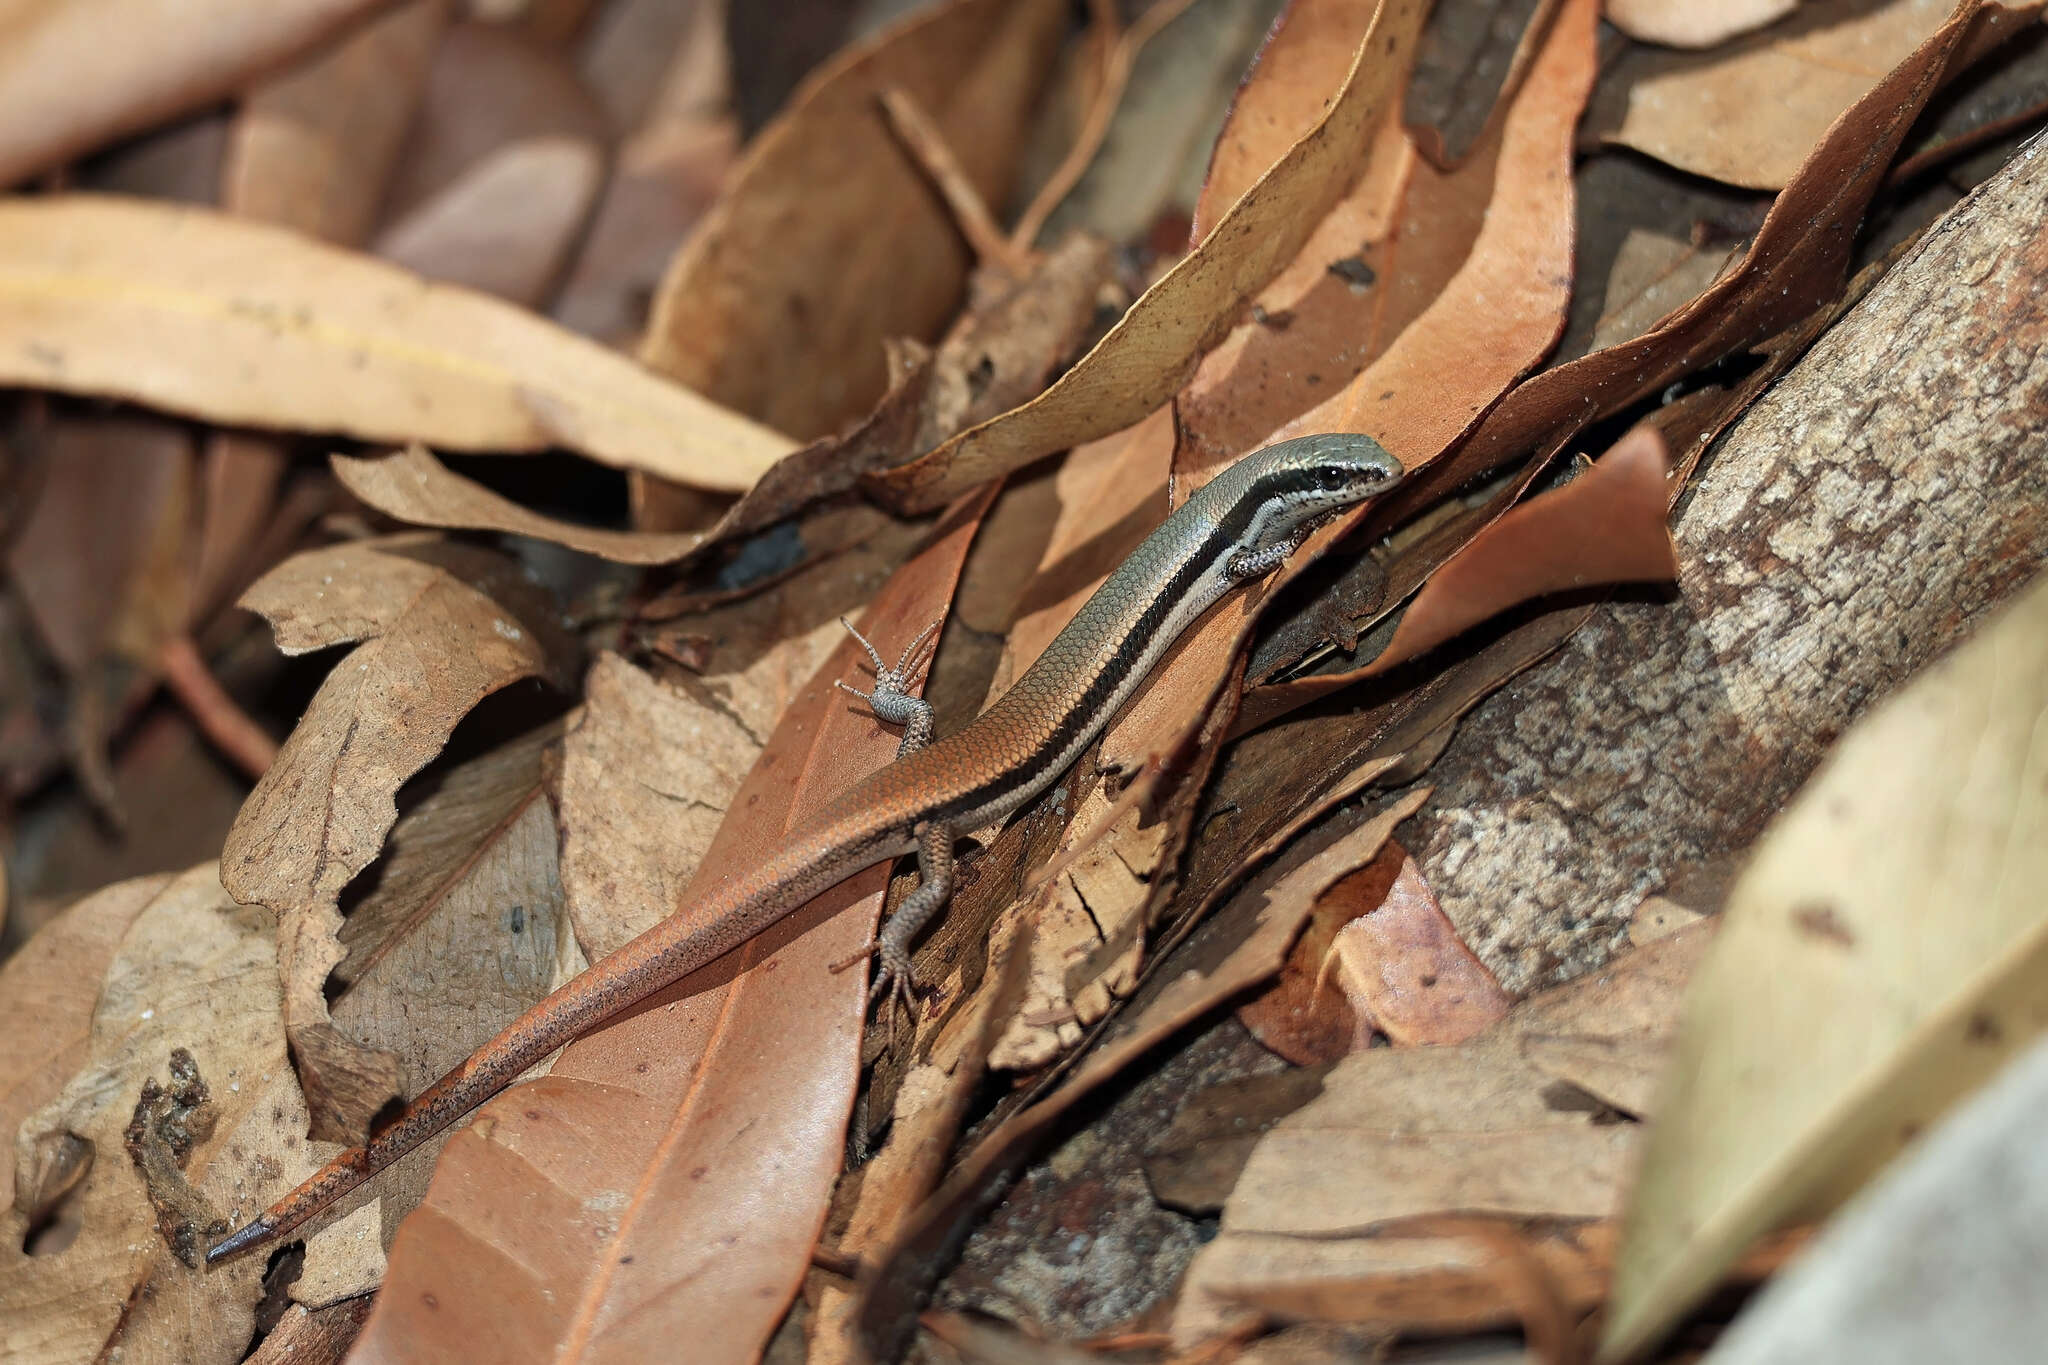 Image of Fire-Tailed Skink